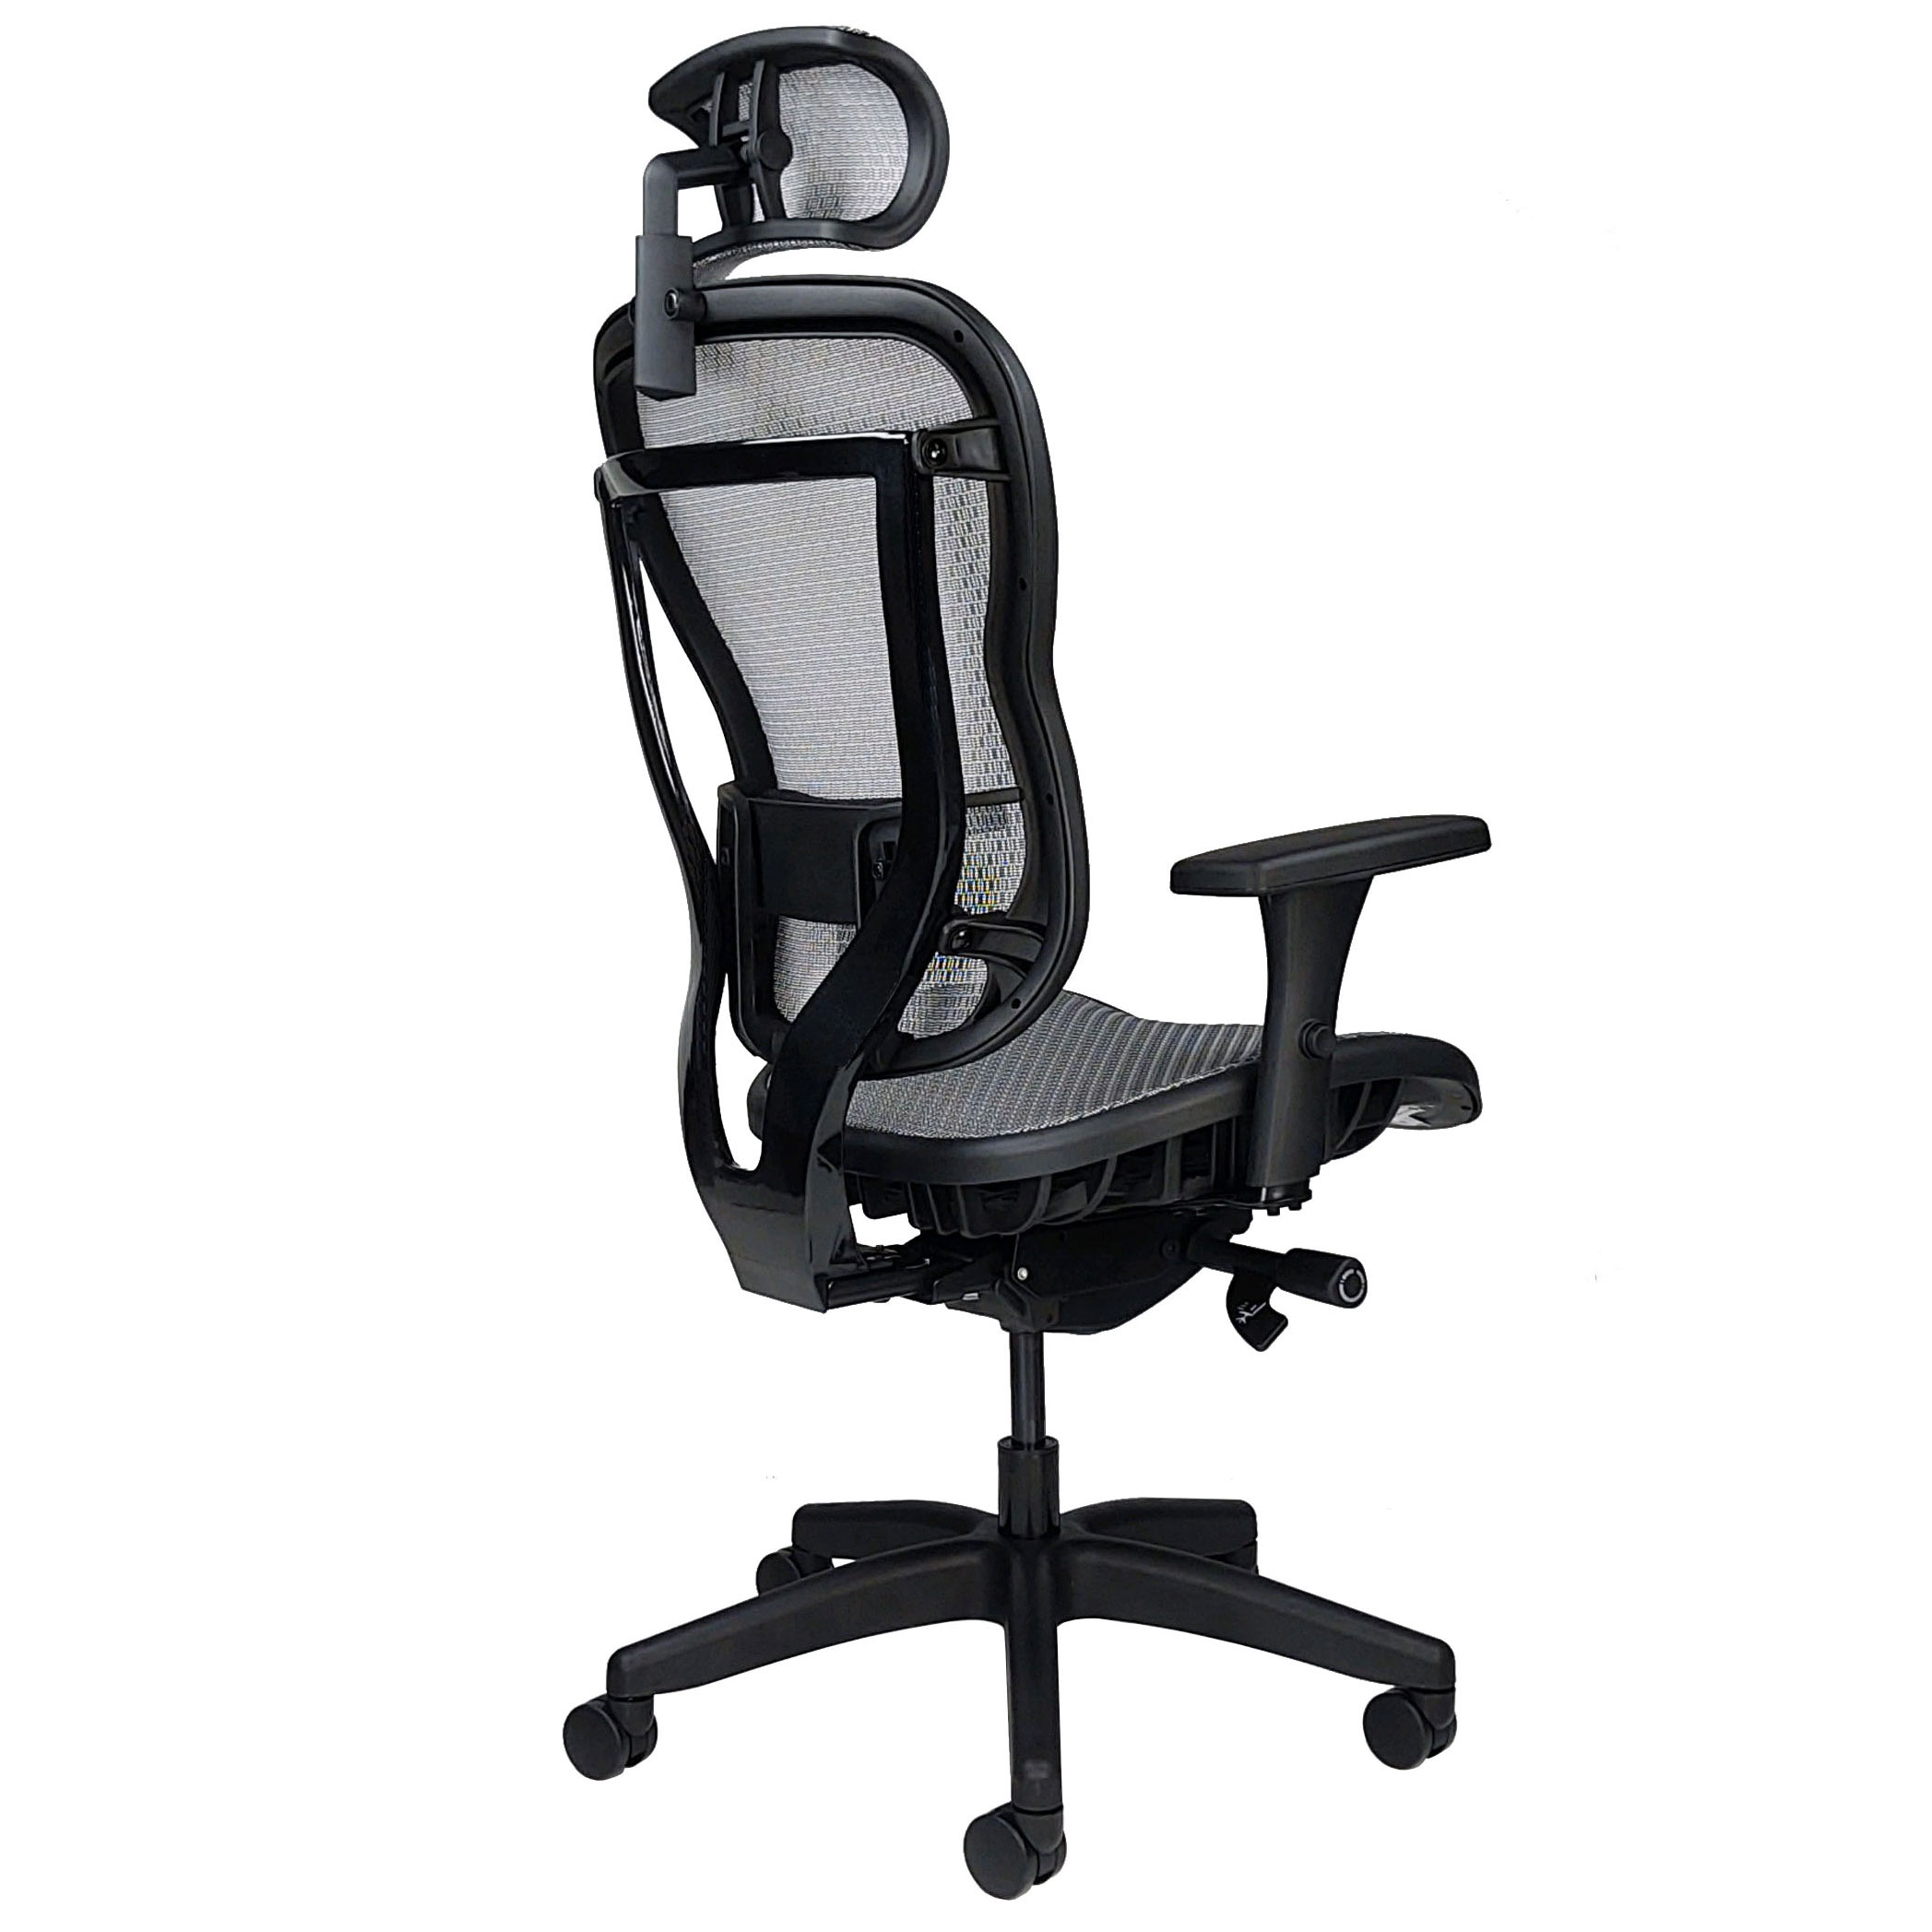 All-mesh ergonomic office chair with headrest, arms and wheels - back angle